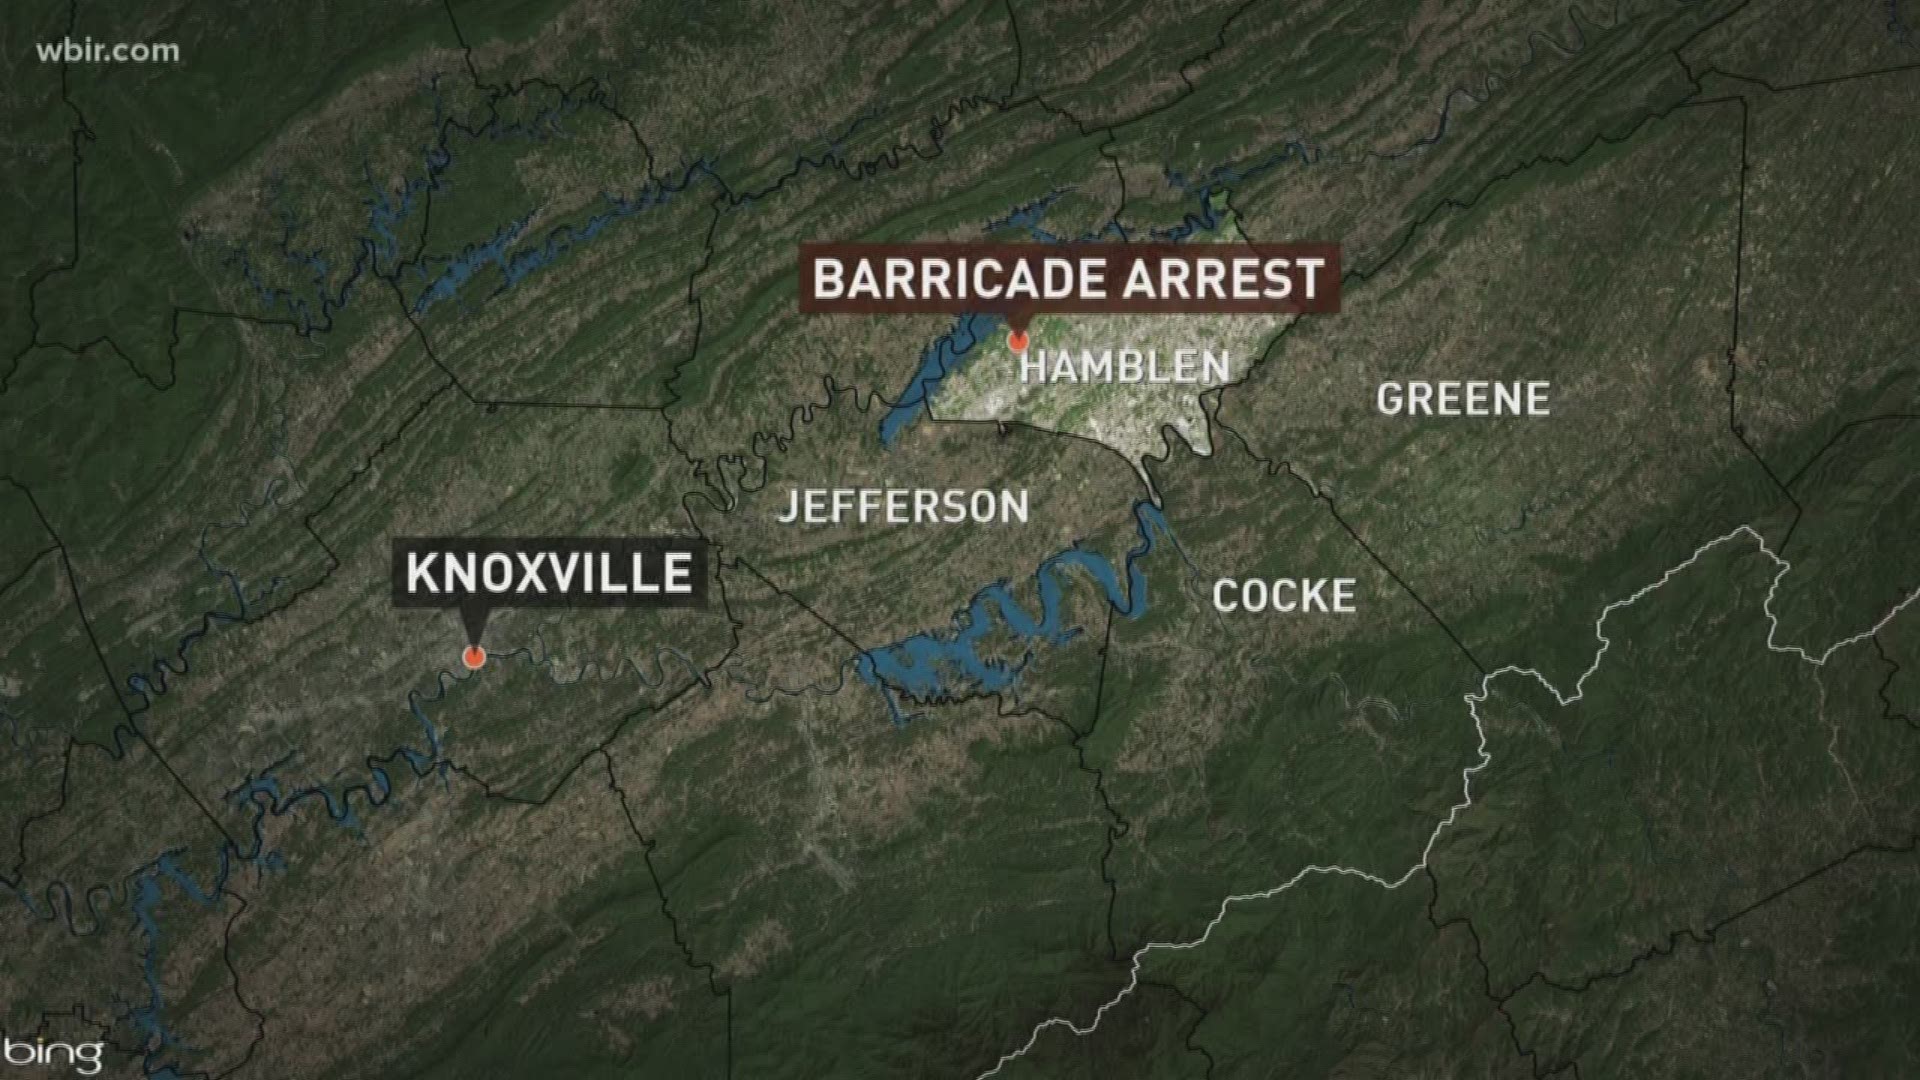 A Hamblen County man is now behind bars after he barricaded himself in a home.